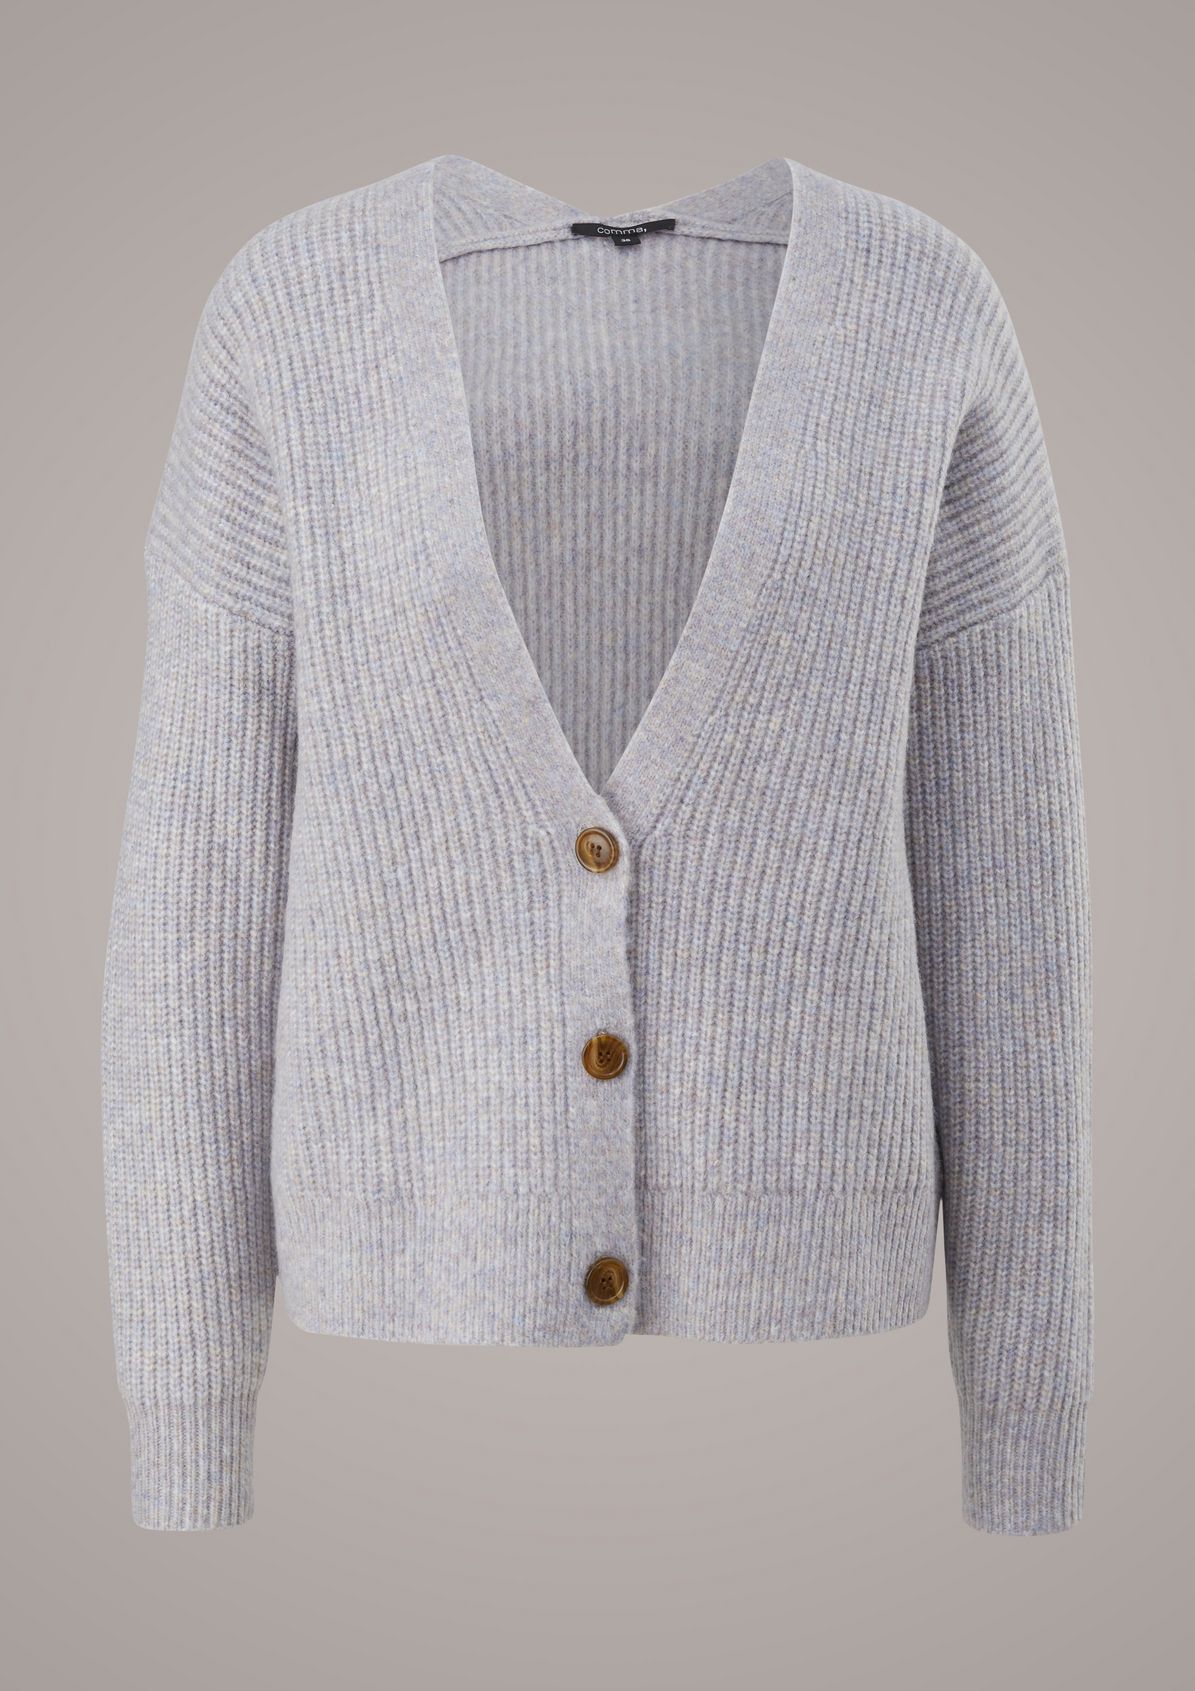 Cardigan in soft blended wool from comma